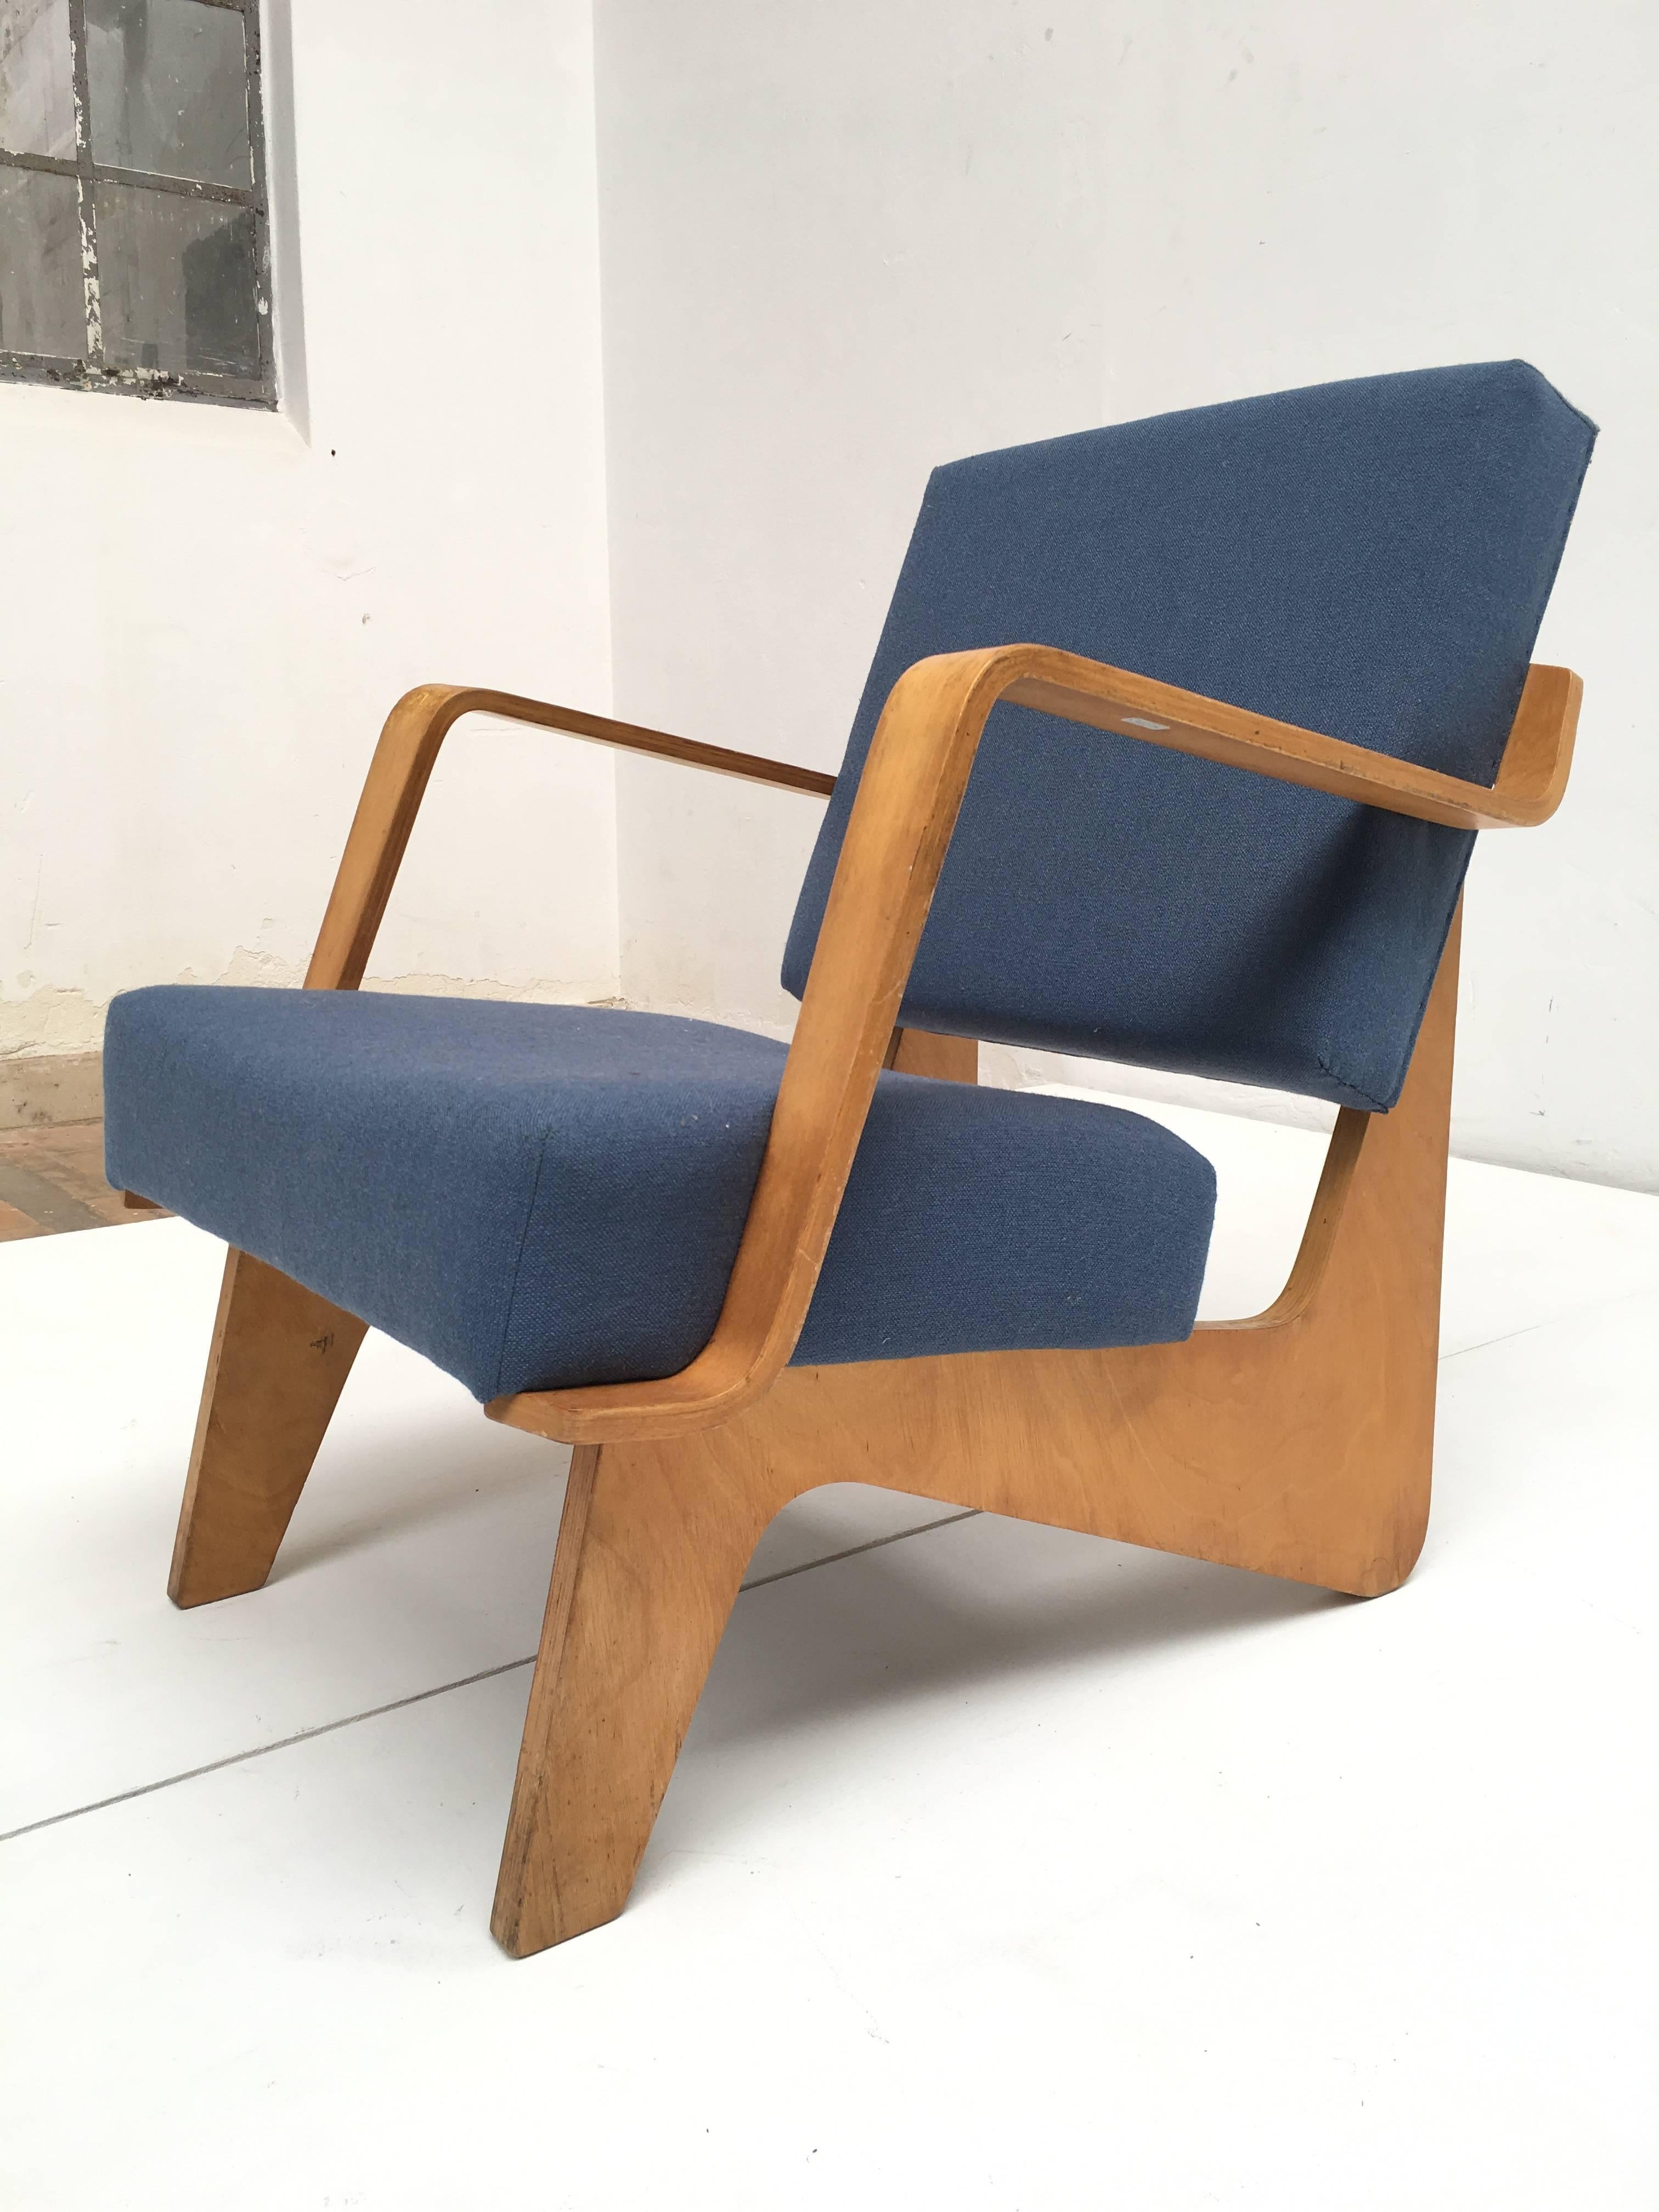 Beautiful molded plywood armchair, Model FB03 from the Combex series, designed in 1952 by Cees Braakman for UMS Pastoe. 

After his return from the US in 1949, Cees Braakman and UMS Pastoe decided to start creating modern, affordable and low-cost